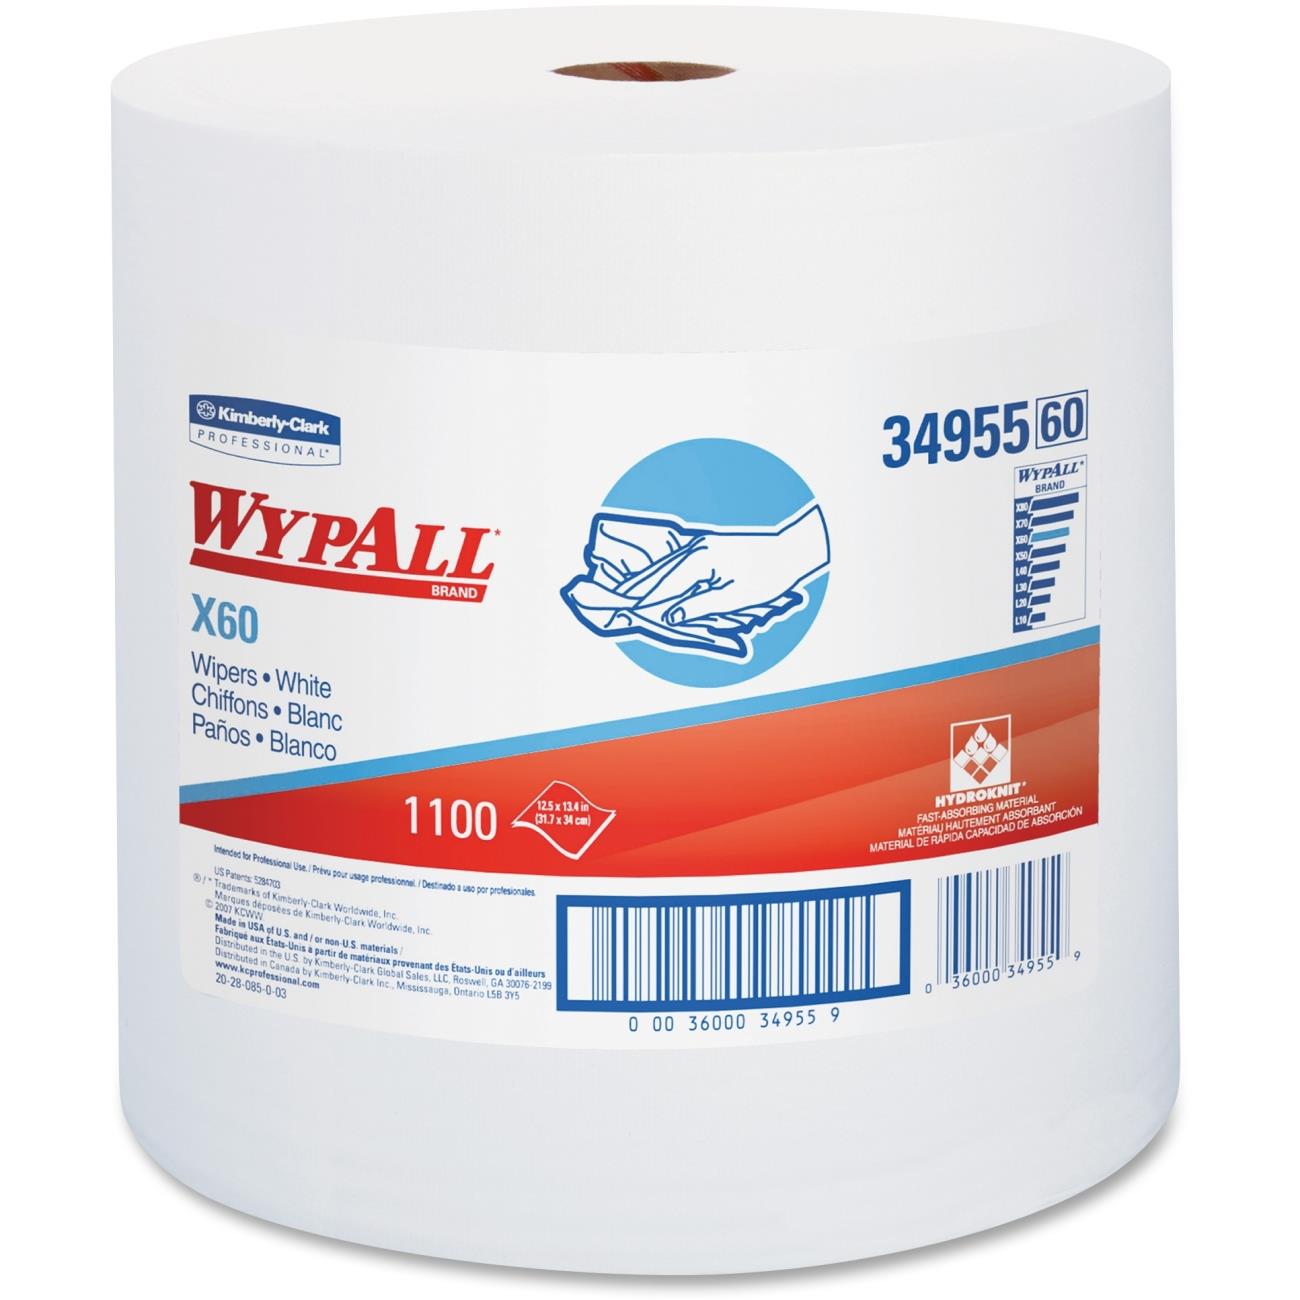 WYPALL X60 JUMBO ROLL WHITE 1100 WIPERS - Tagged Gloves